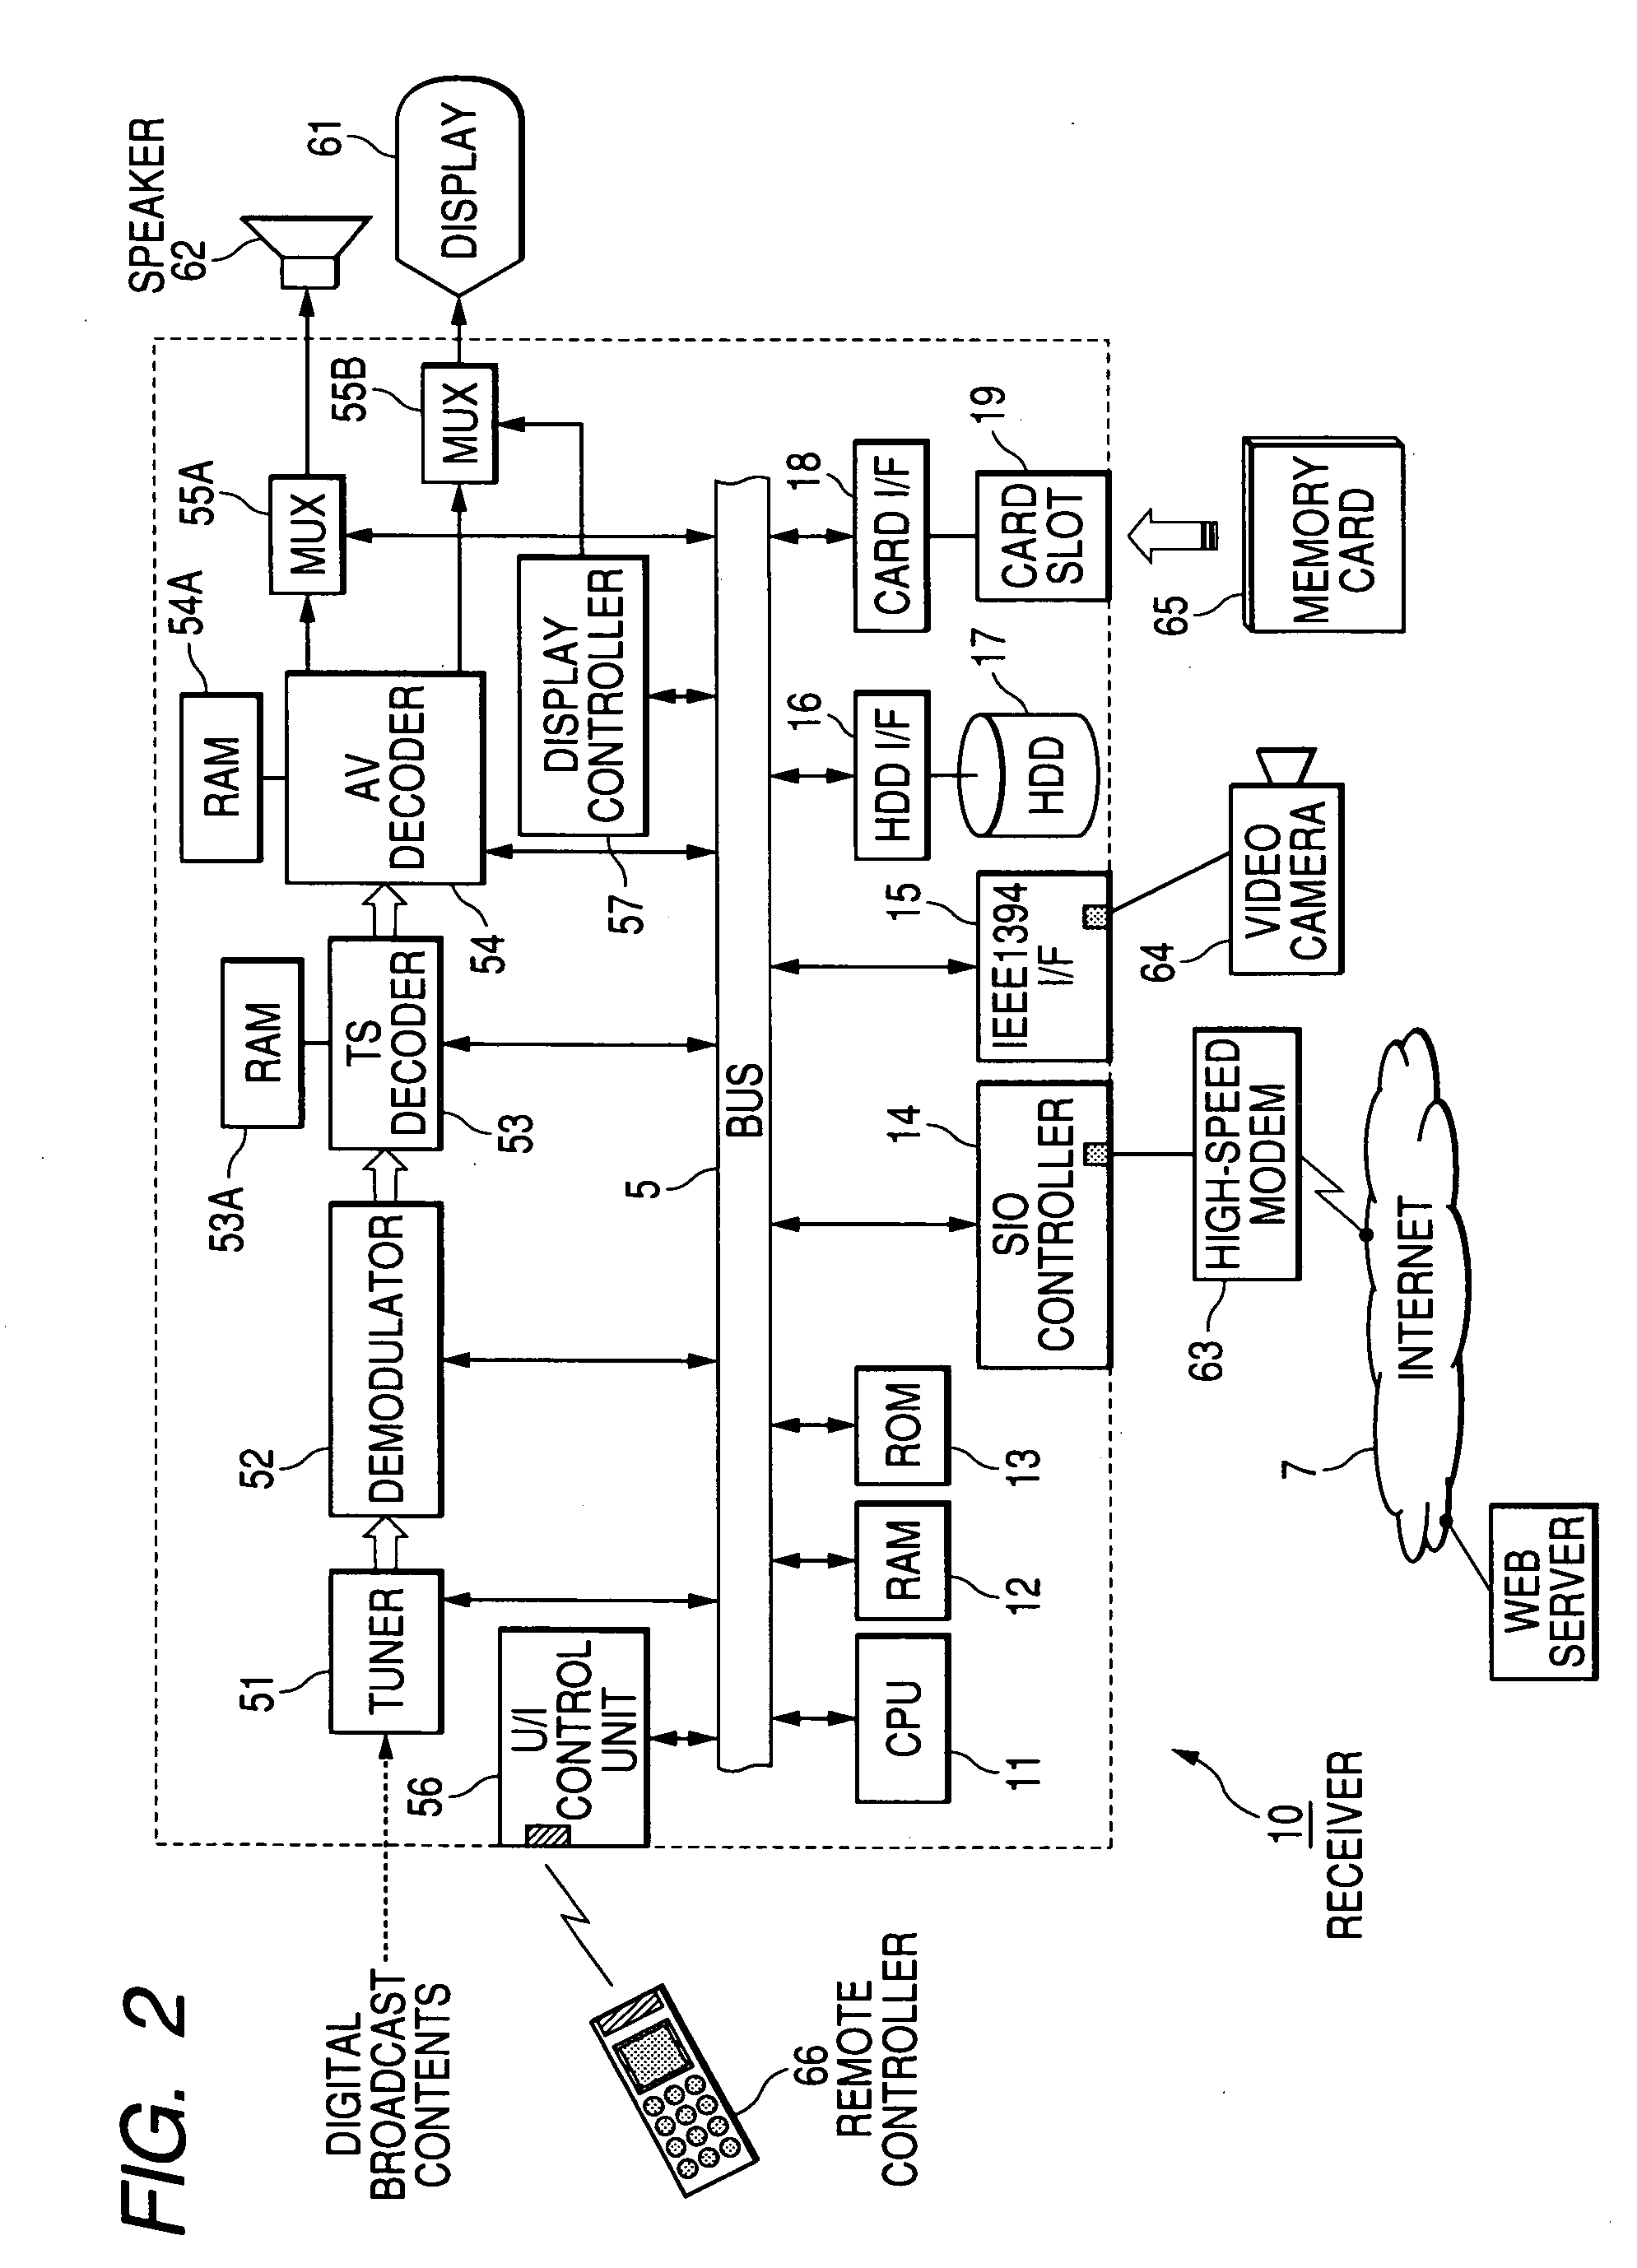 Content delivery system, content delivery apparatus, content recording/playback apparatus, content recording/playback method, and computer program